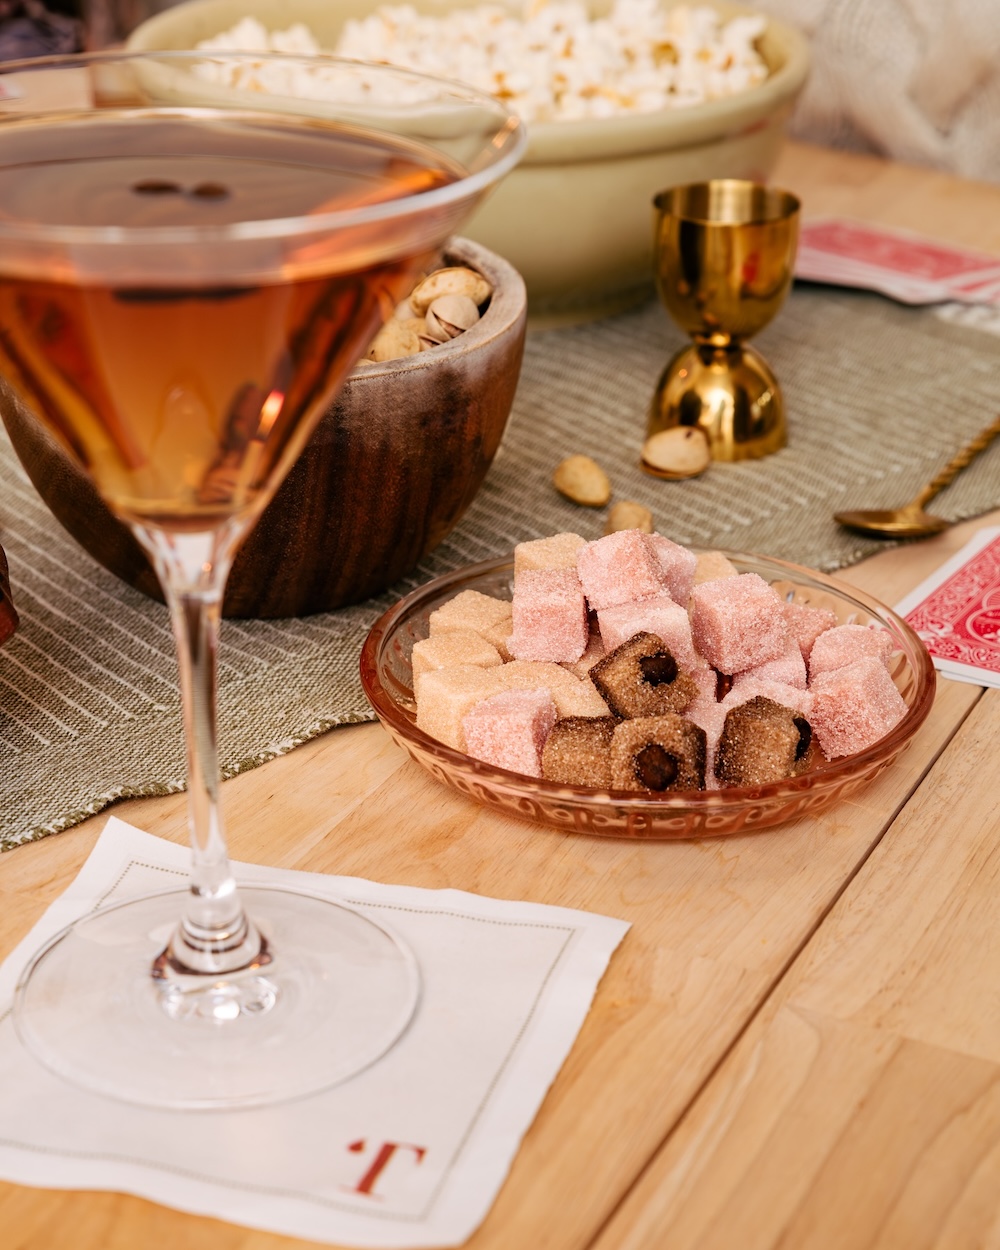 Image of Teaspressa’s instant cocktail cubes in a dish with a cocktail-filled martini glass.